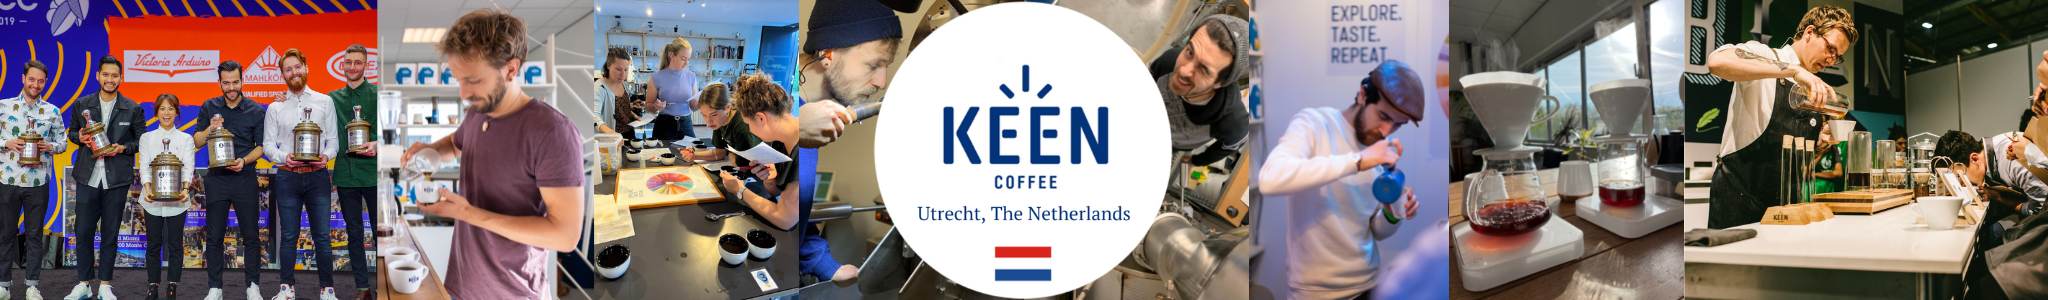 Dog and hat coffee, keen coffee roasters - coffee subscriptions, international roaster showcase